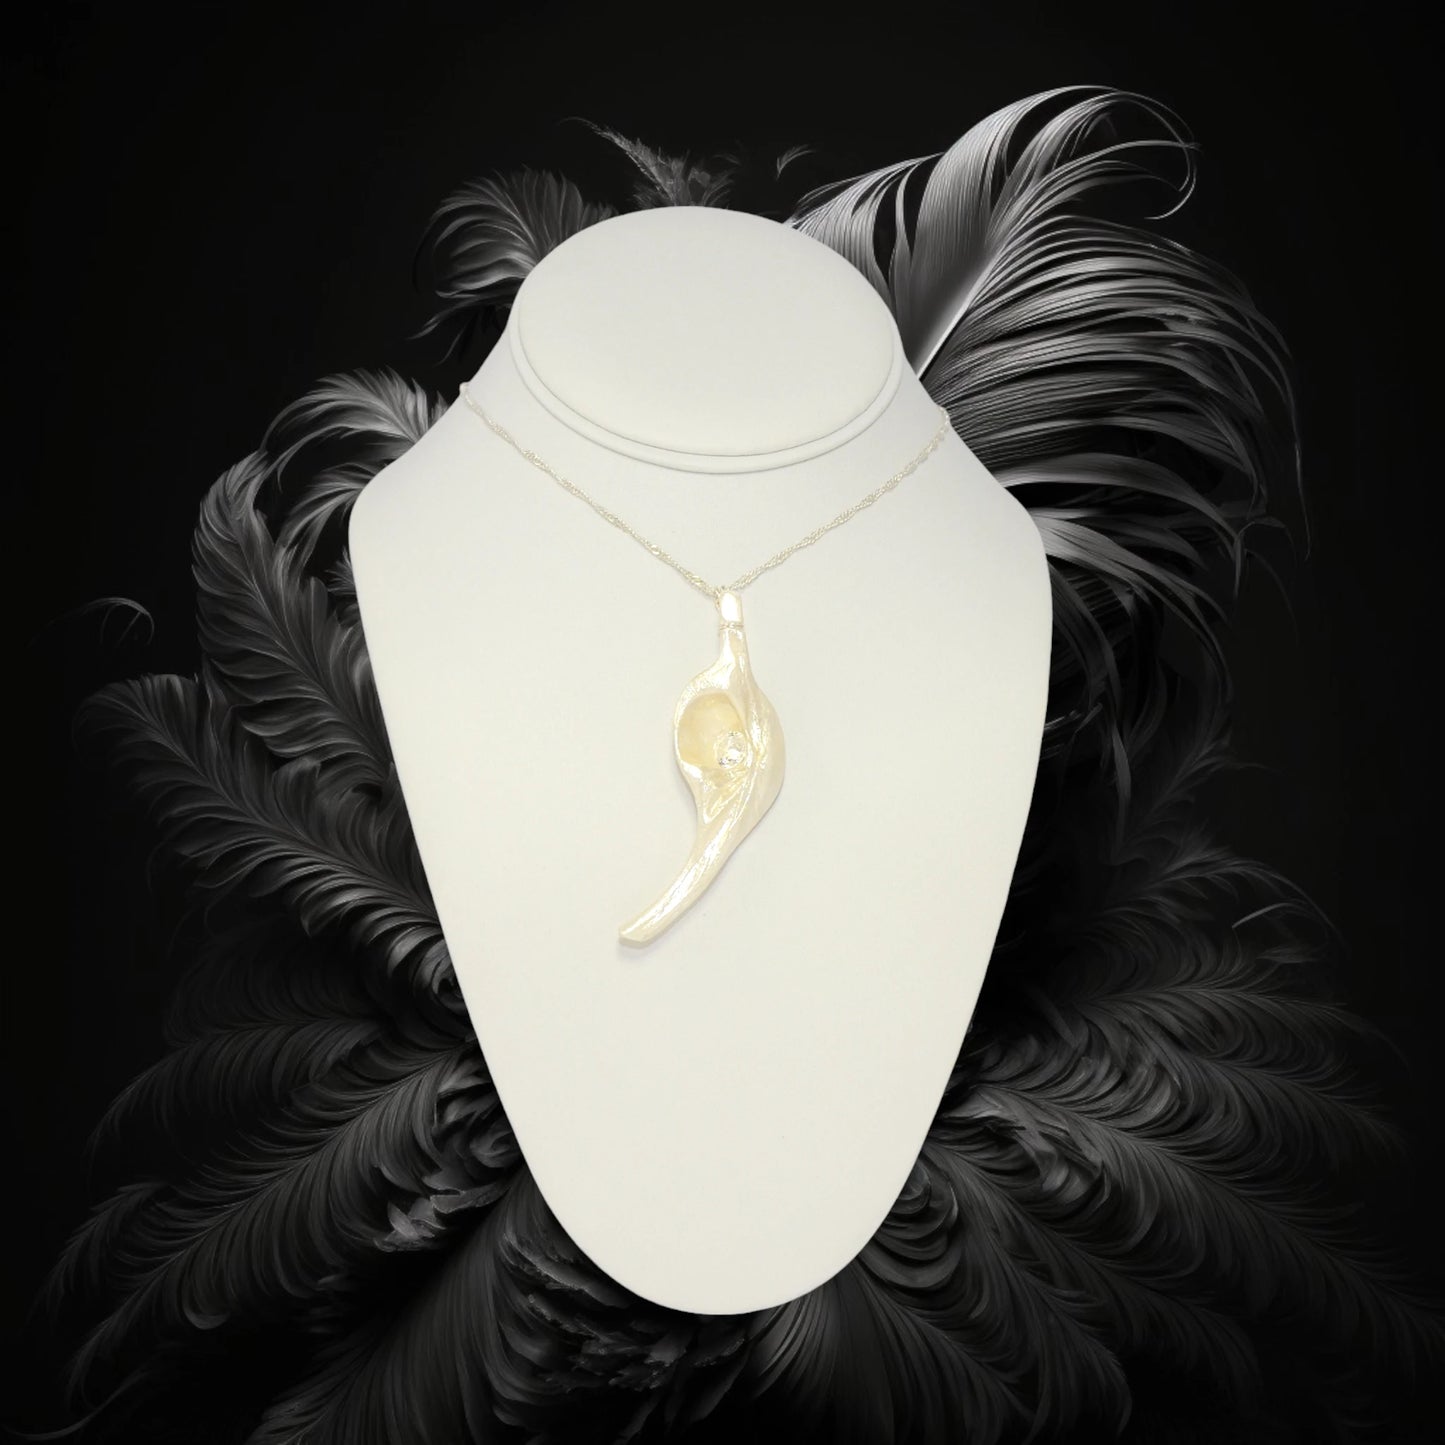 Diamond Star natural seashell pendant with eight mm faceted herkimer diamond. The pendant is shown hanging from a chain on a necklace displayer.  The background is black with an array of leaves.